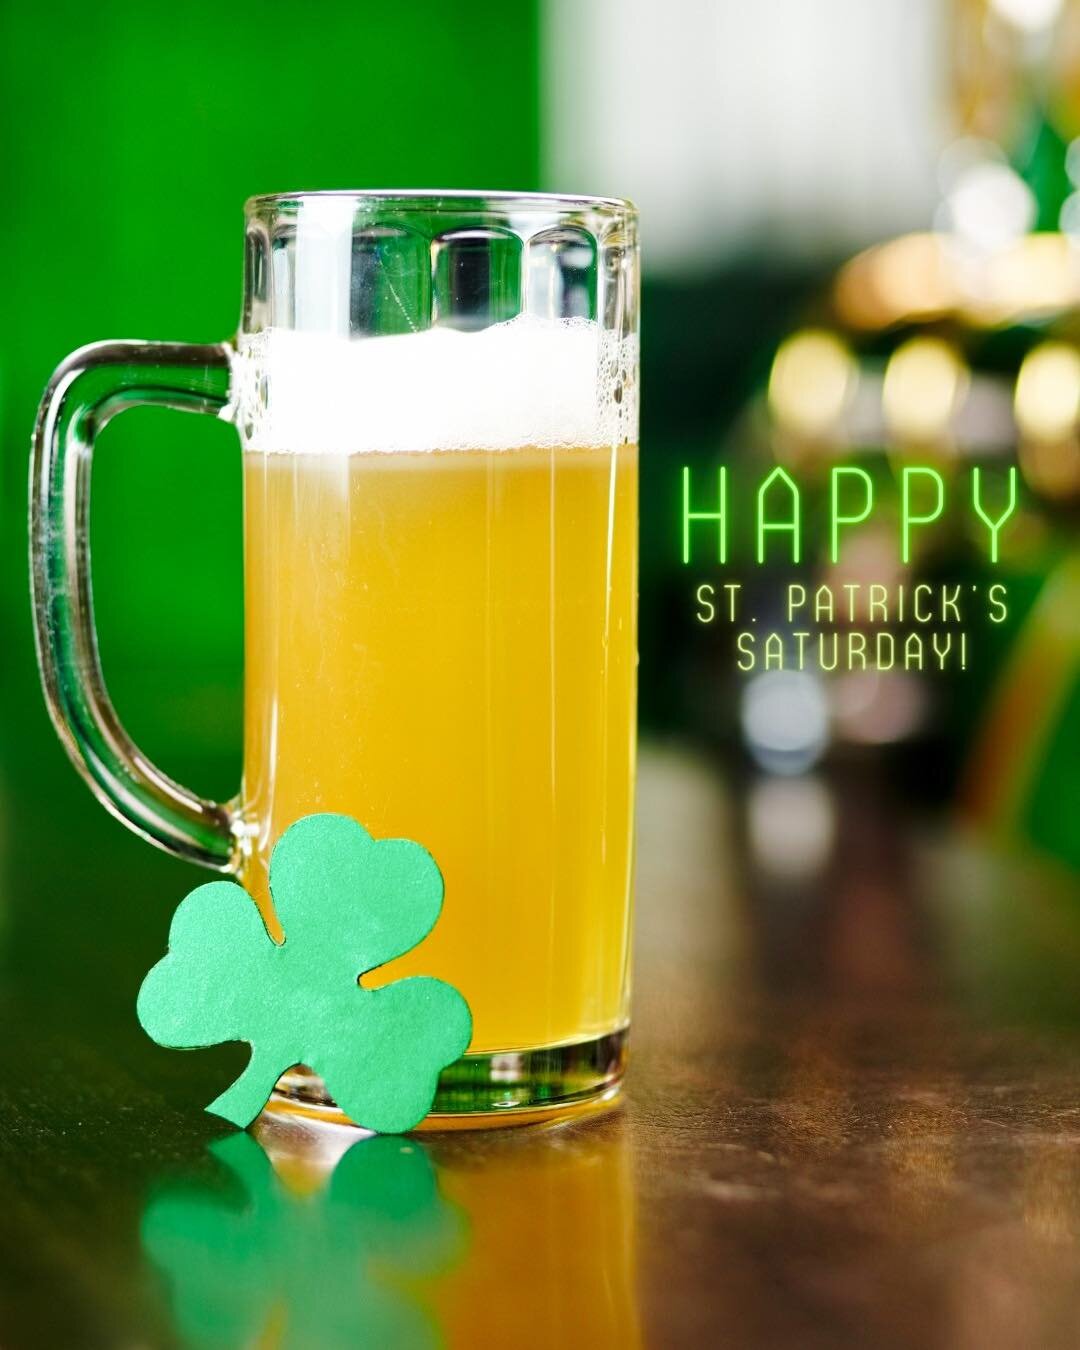 Join us after the St. Patrick's parade for some Irish cheer! 🍀 Enjoy $5 shamrock beers and Irish slammers at Pineapple Ink Tavern as part of the downtown bar crawl. Let's keep the celebration going! 🍻💚🍀 

#StPatricksDay #BarCrawl #DrinkSpecials #